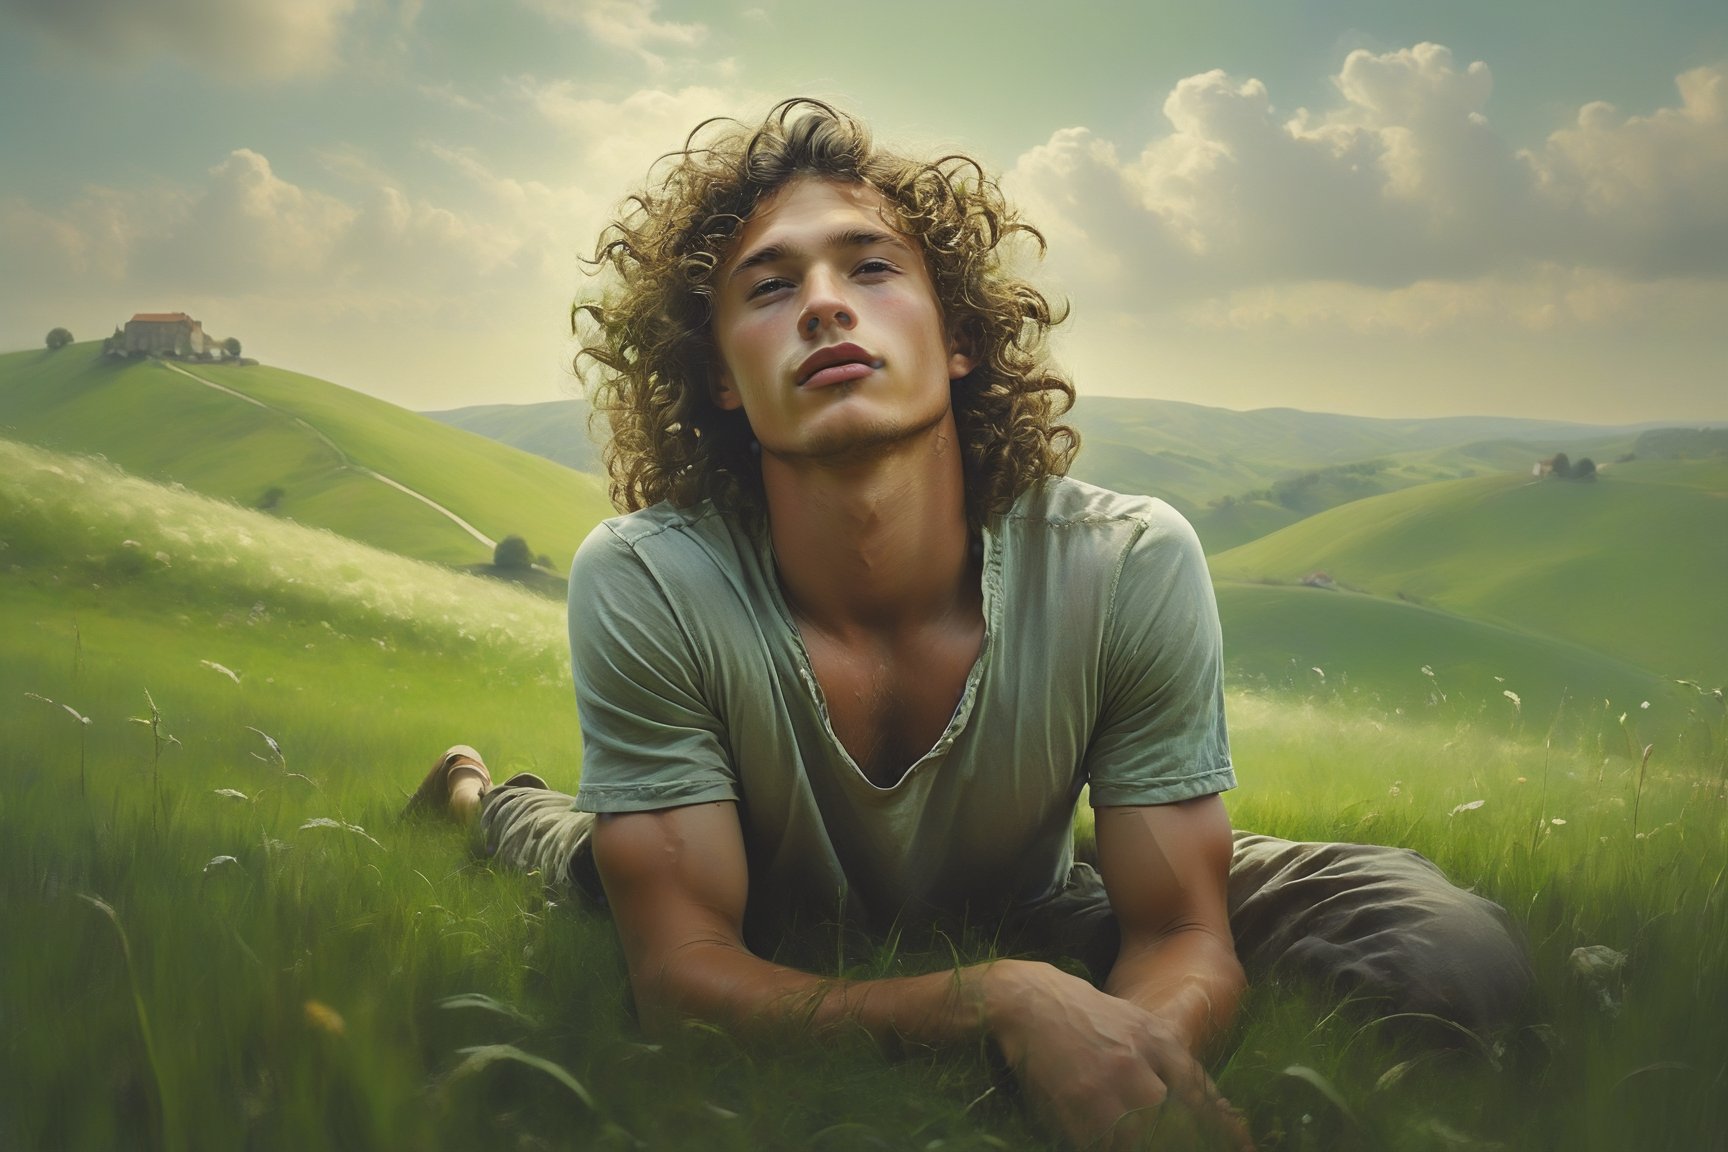 Using realistic rendering techniques, create a breathtaking 3D landscape of rolling hills and vibrant green fields. In the center of the scene, a young man with long, curly hair rests in the grass, his legs lifted towards the sky and his arms outstretched. The soft, muted colors and delicate details of the scene evoke a sense of tranquility and beauty.